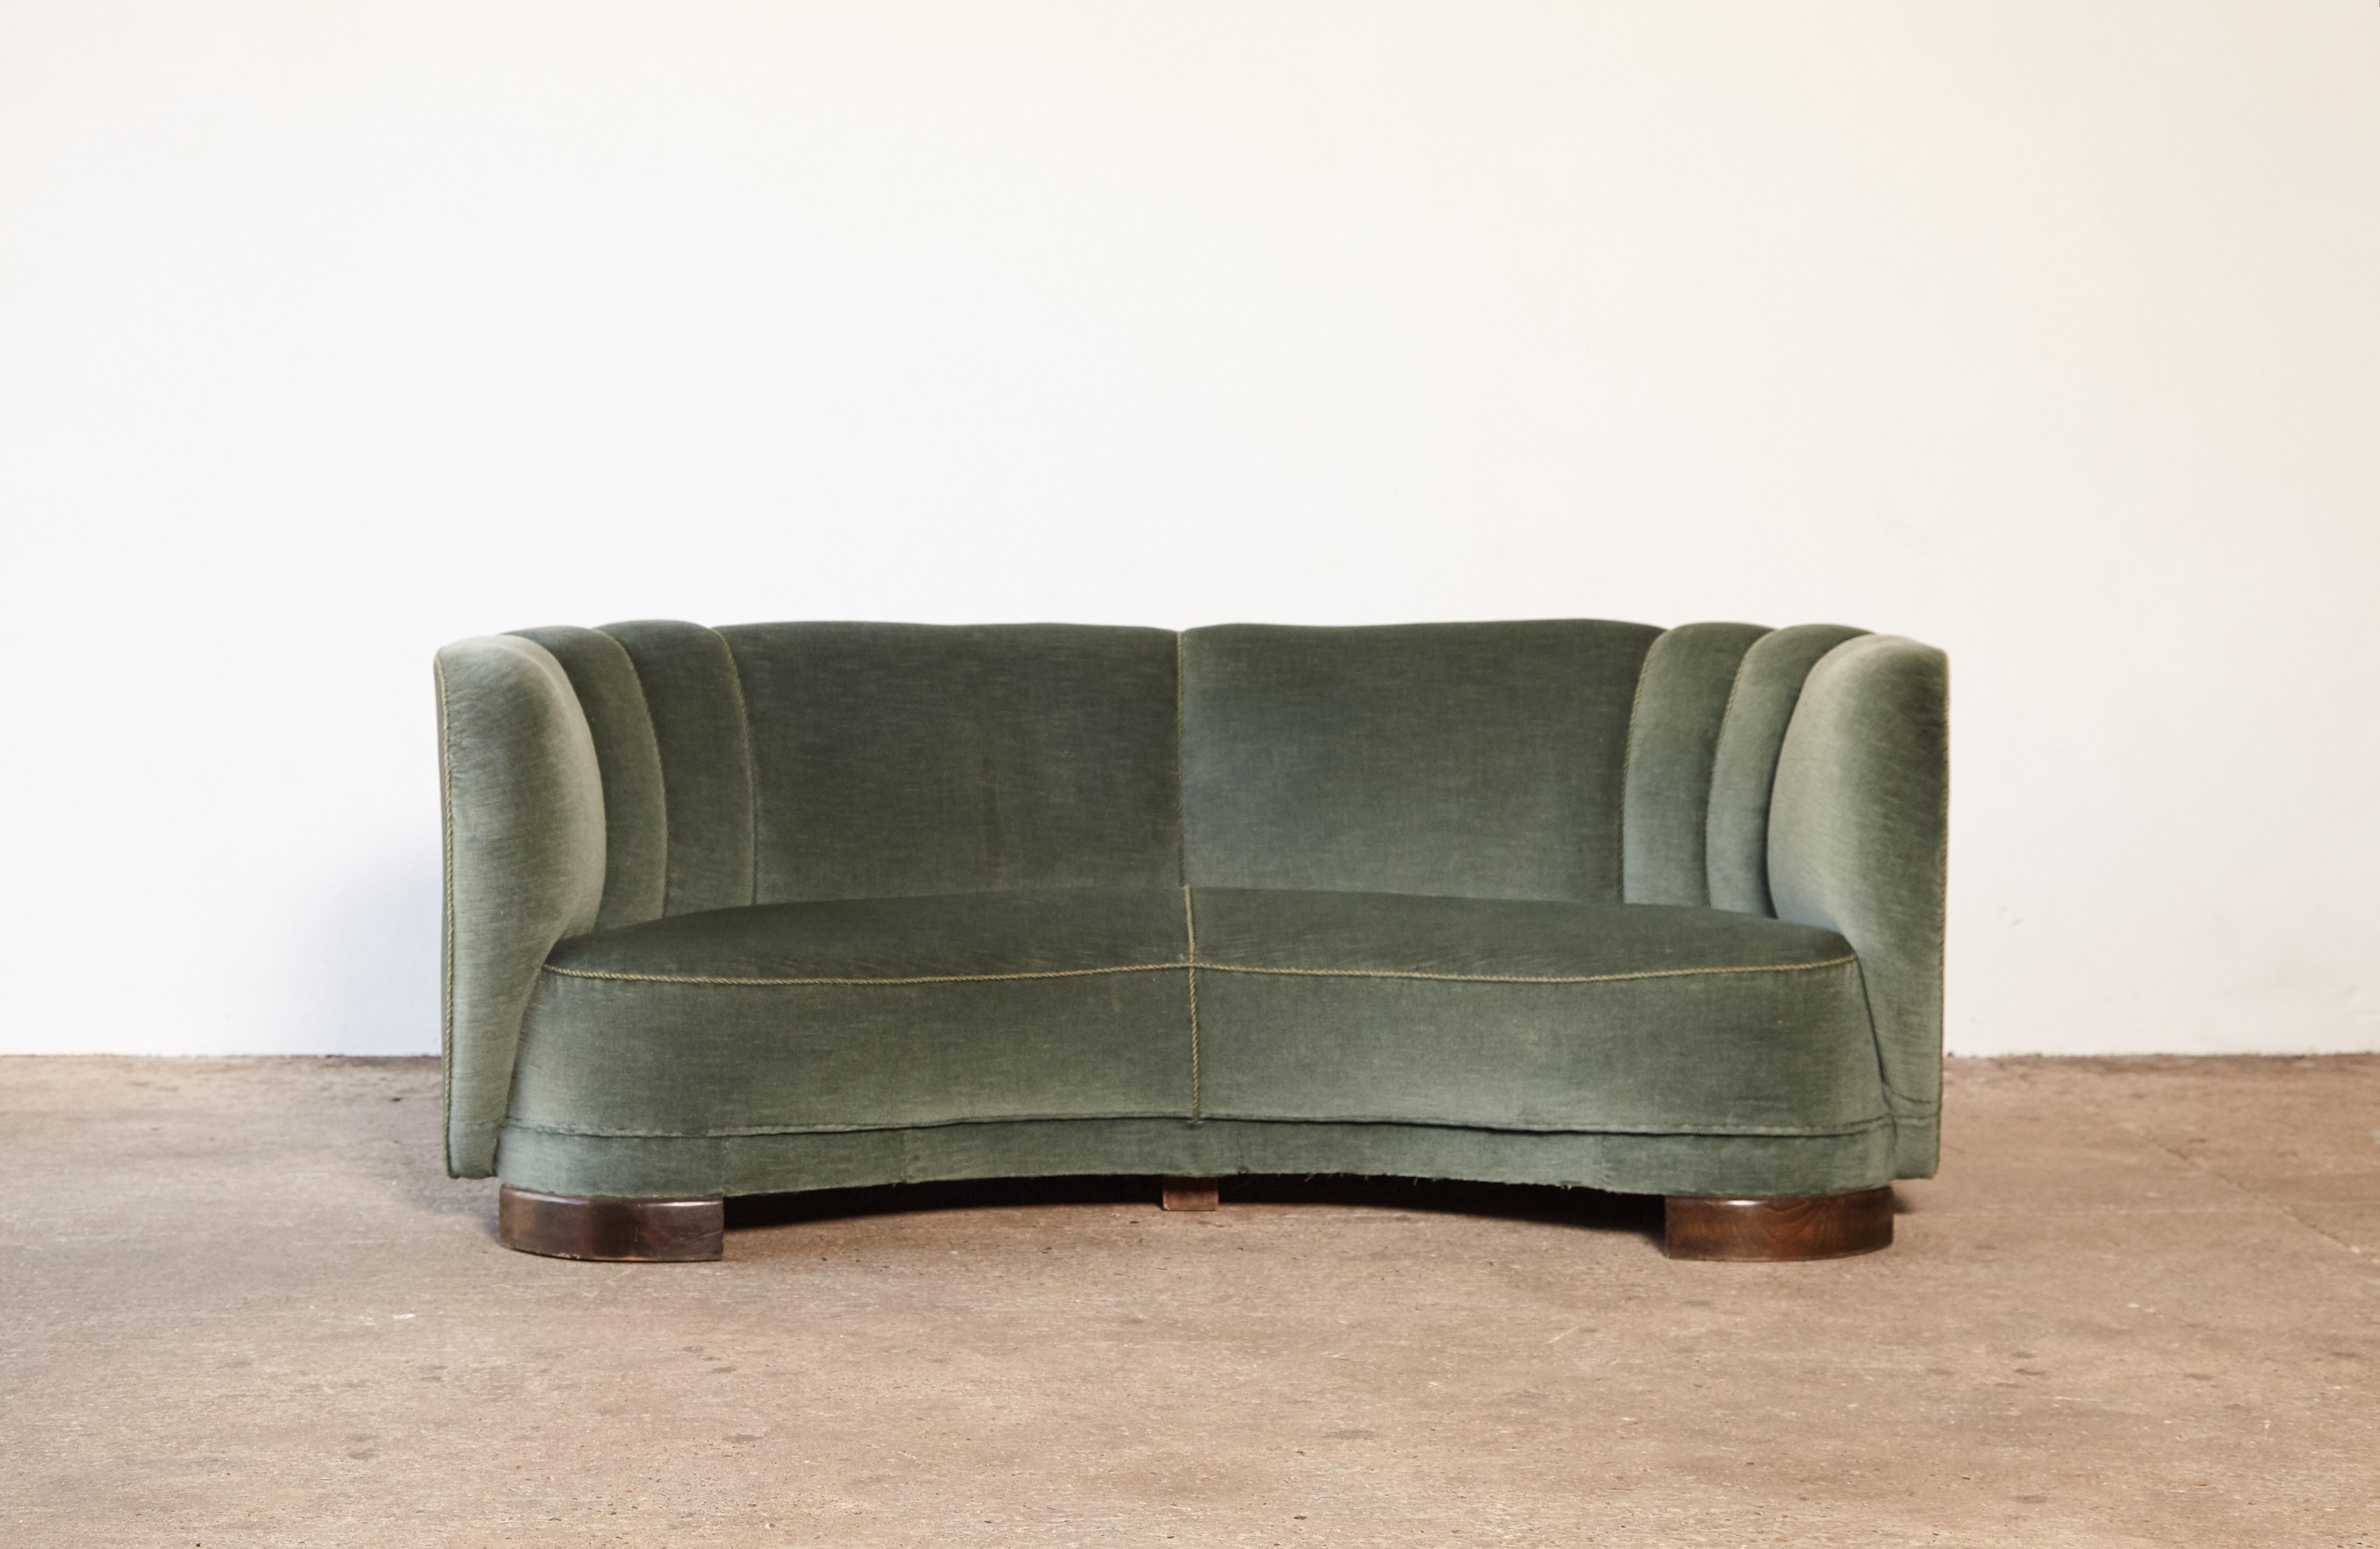 Banana shaped curved sofa in the style of Viggo Boesen and Fritz Hansen, made in Denmark, 1940s. Some wear to green velvet fabric on the back.

 